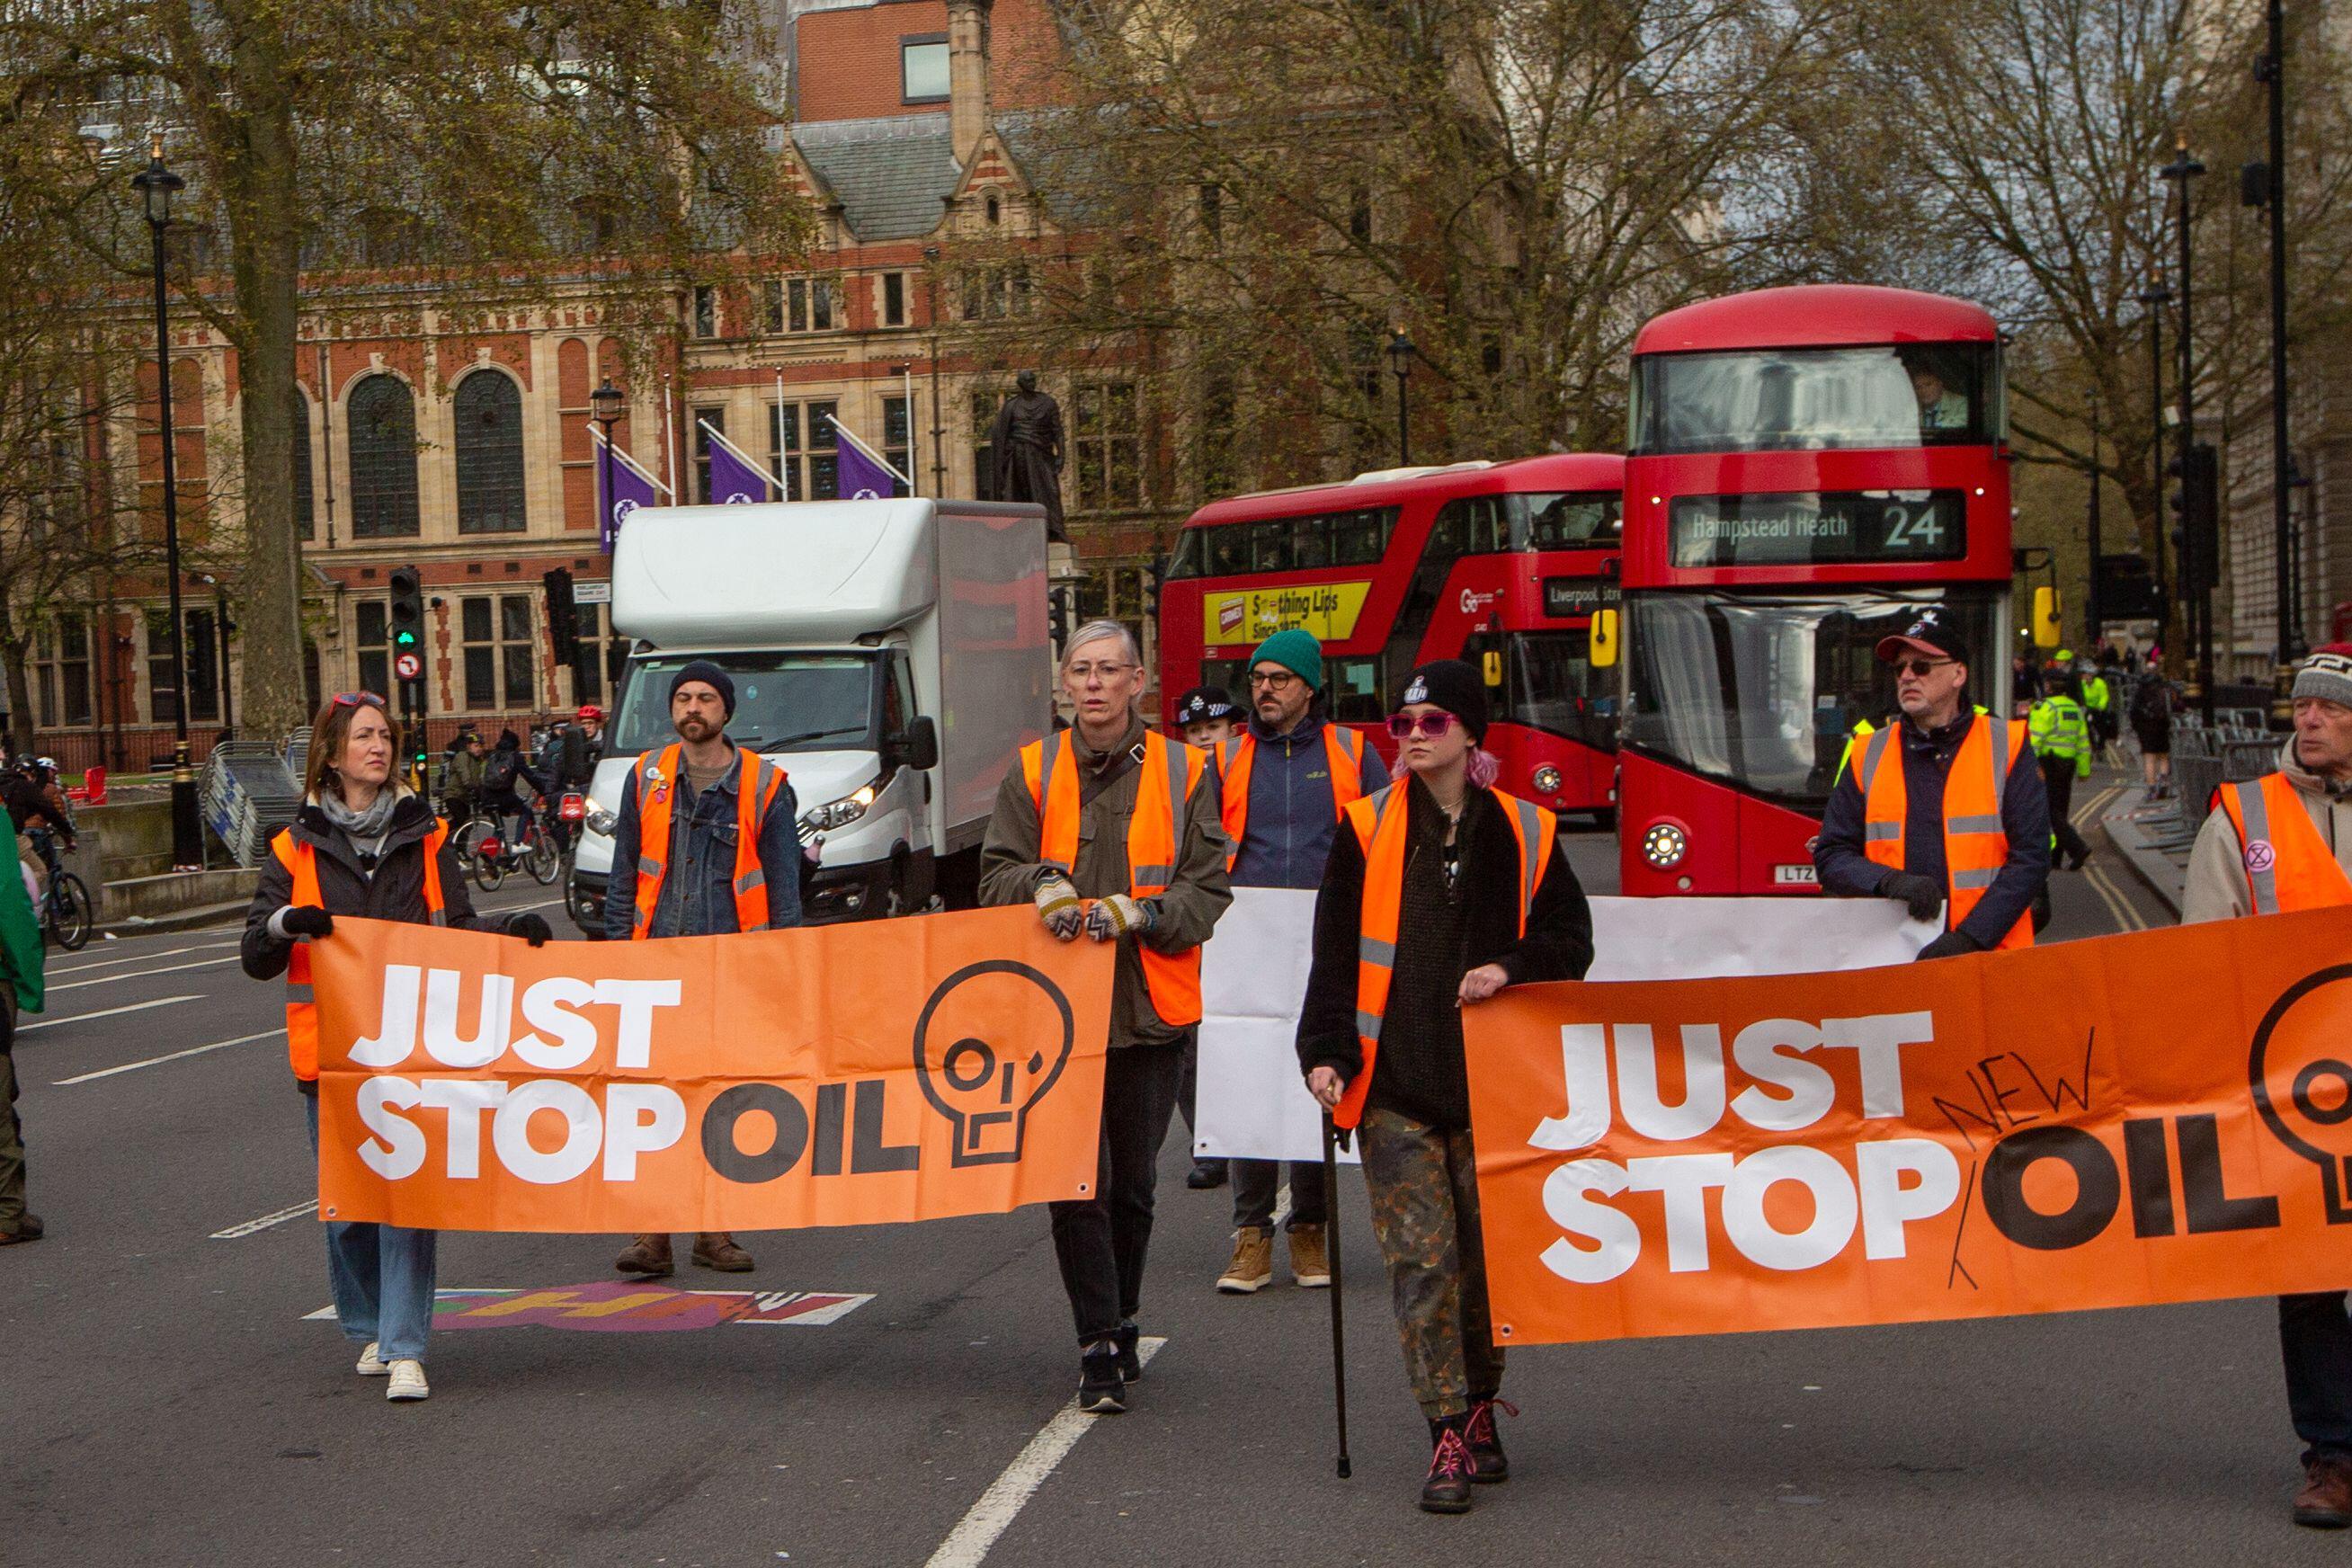 Just Stop Oil brought central London to a standstill for a third consecutive day on Wednesday